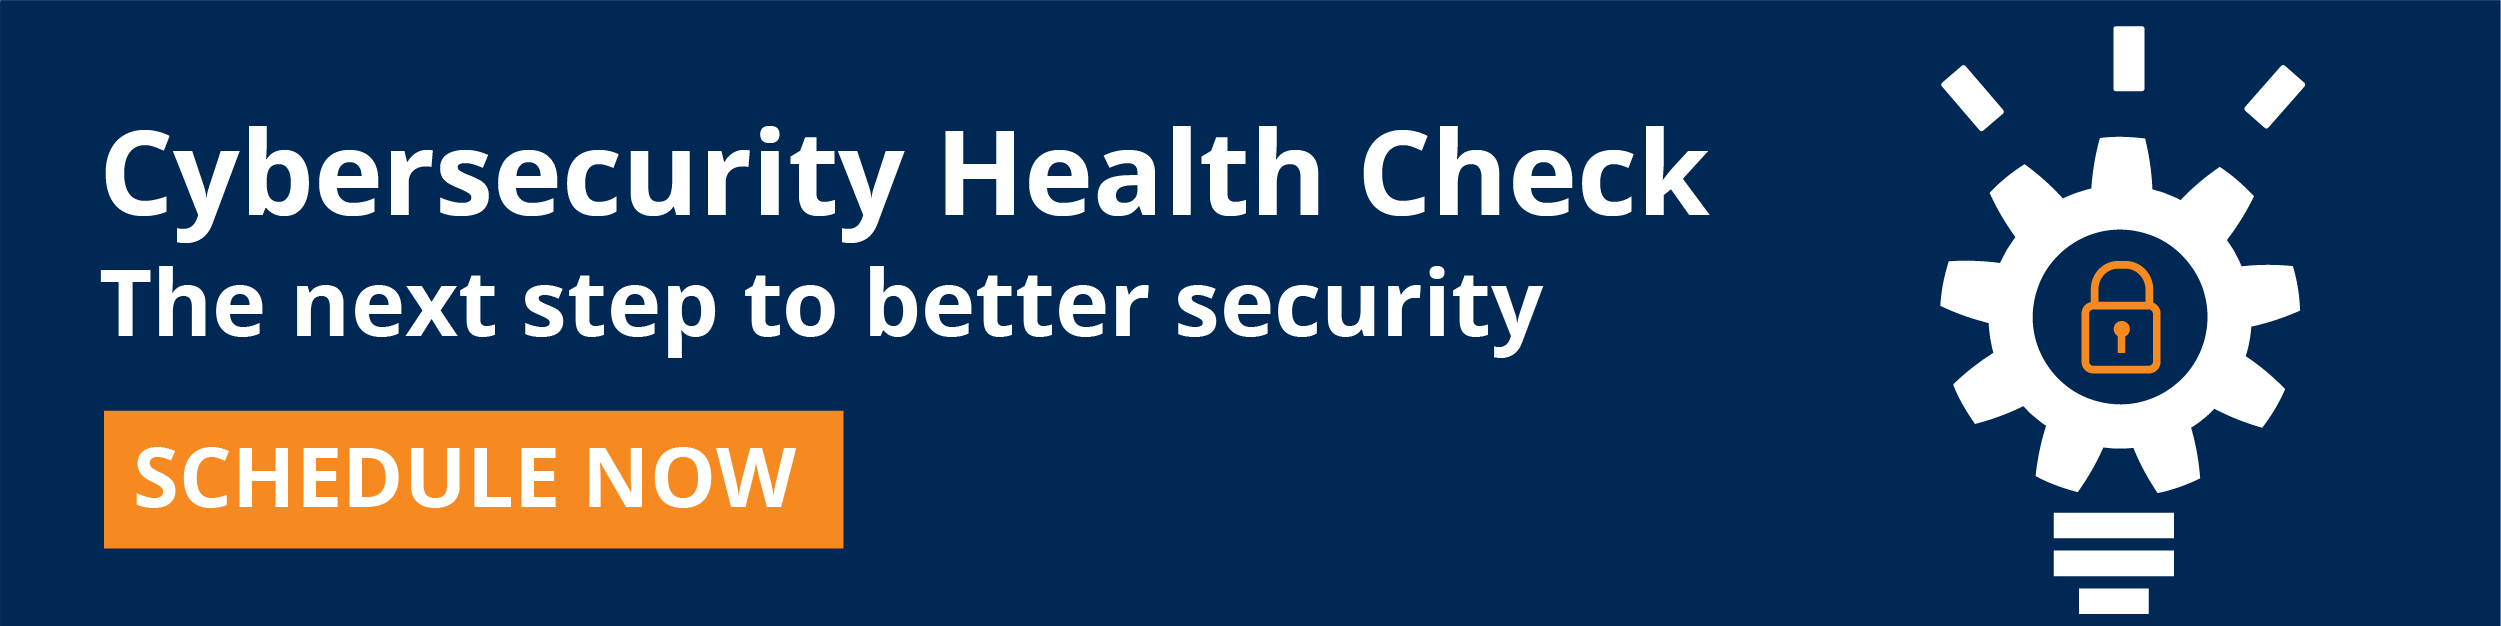 Cybersecurity Health Check_TEMPLATE 10-1